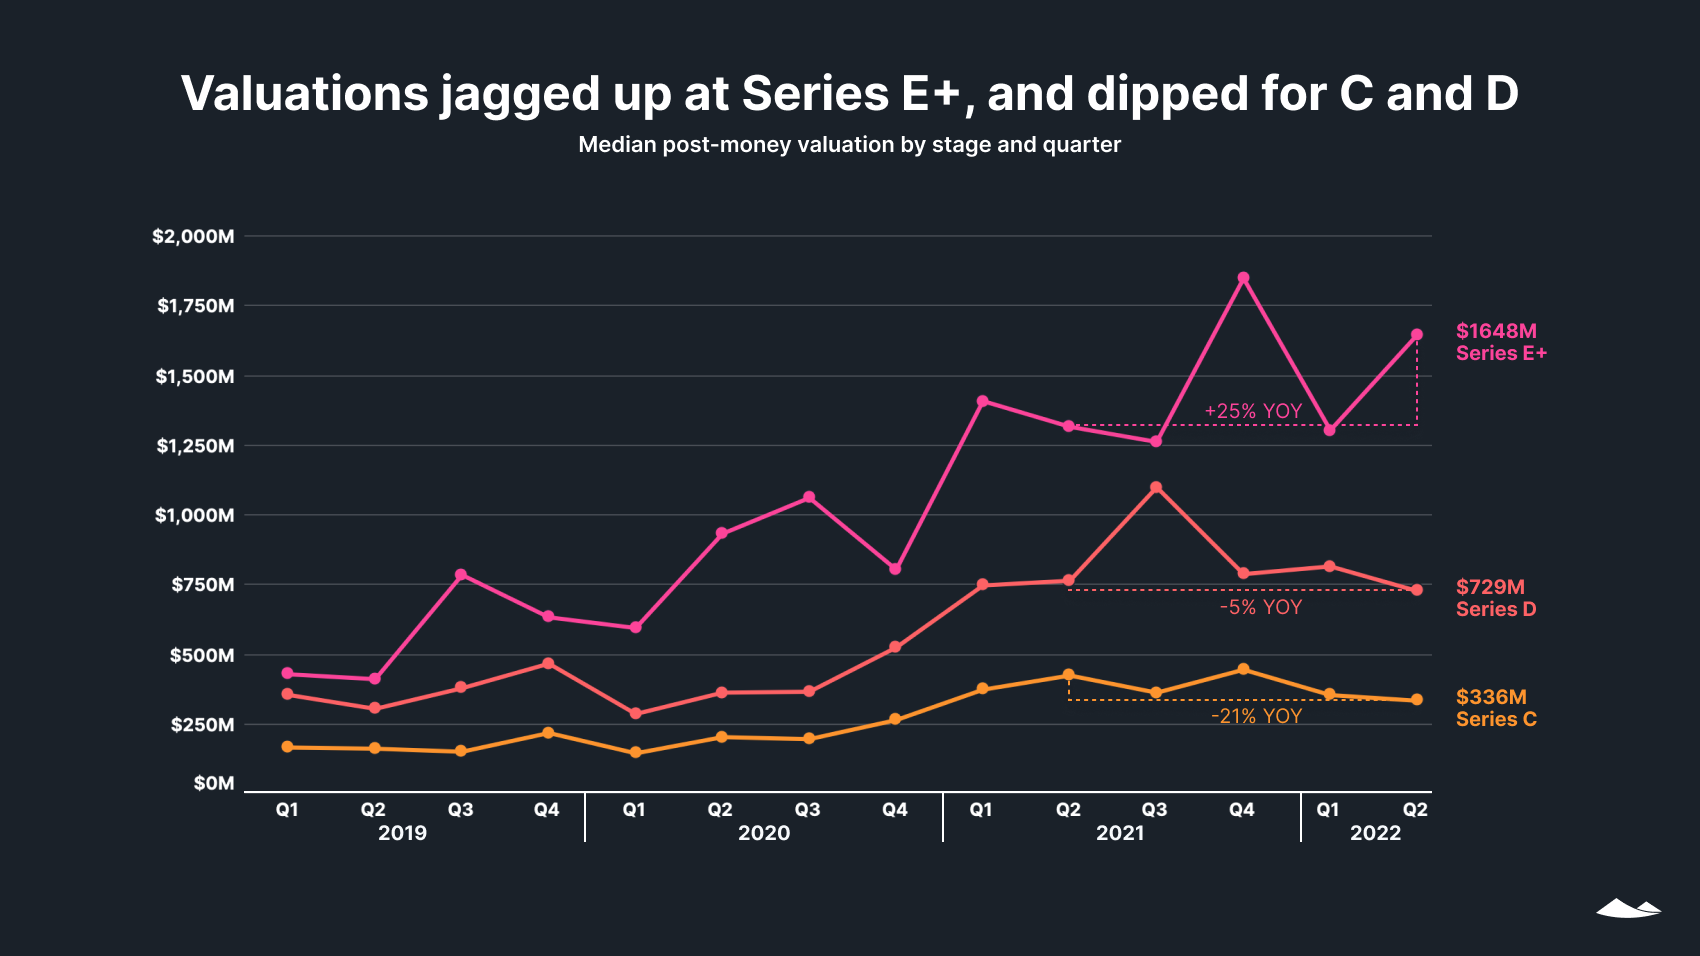 Valuations jagged up at Series E+, and dipped for C and D: Median post-money valuation by stage and quarter. Line chart